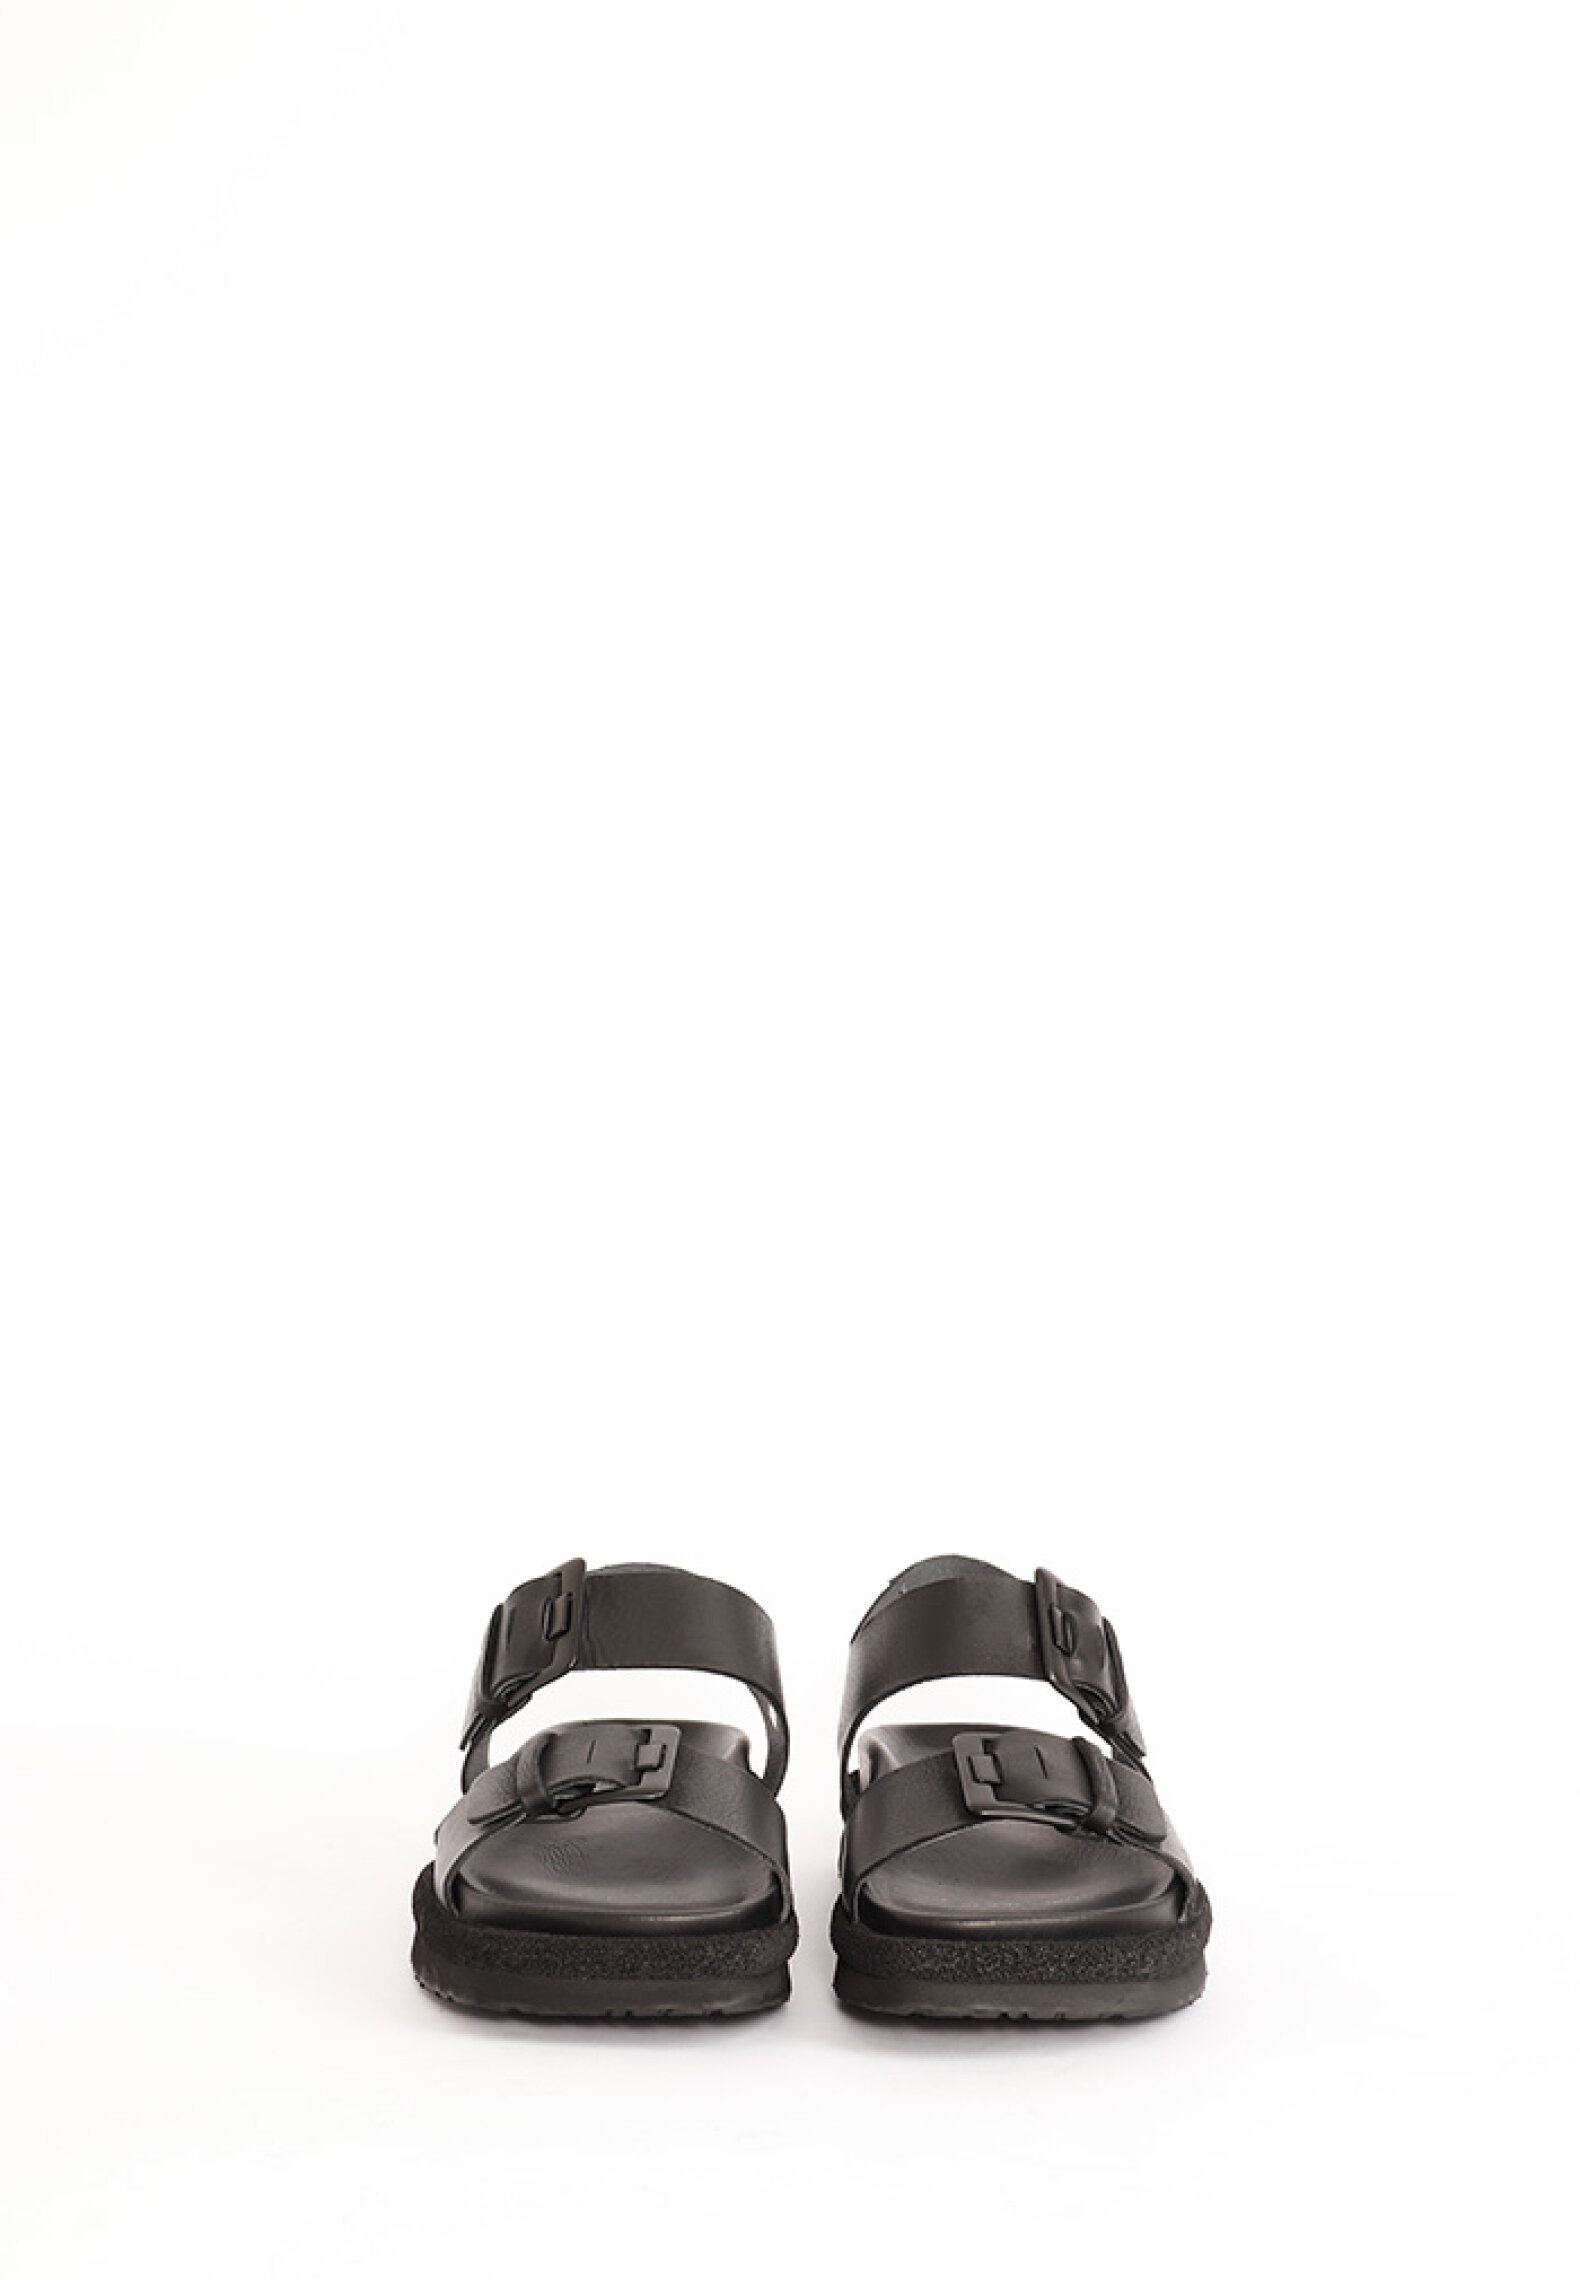 Fern Reporter inaktive Sandals - Lofina - Sandal with buckles and a back strap